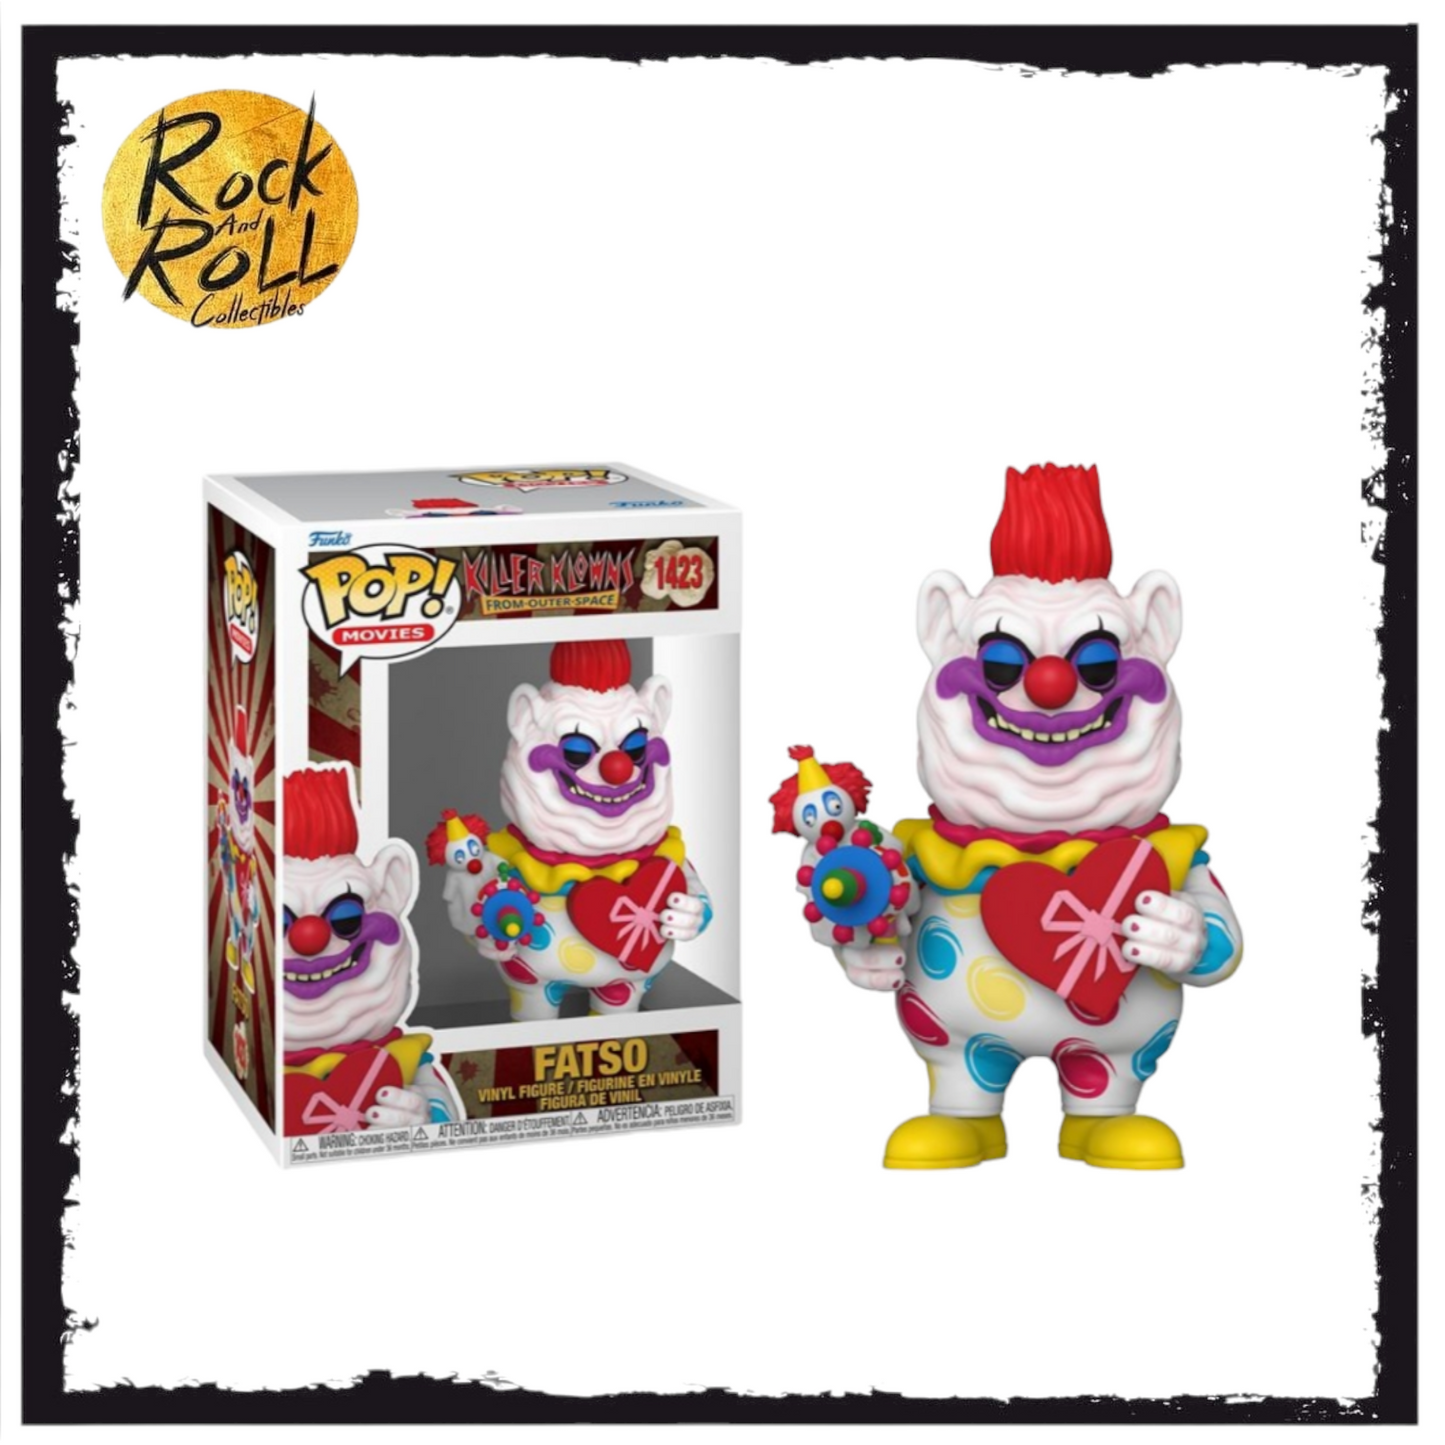 Killer Klowns From Outer-Space - Fatso Funko Pop! #1423